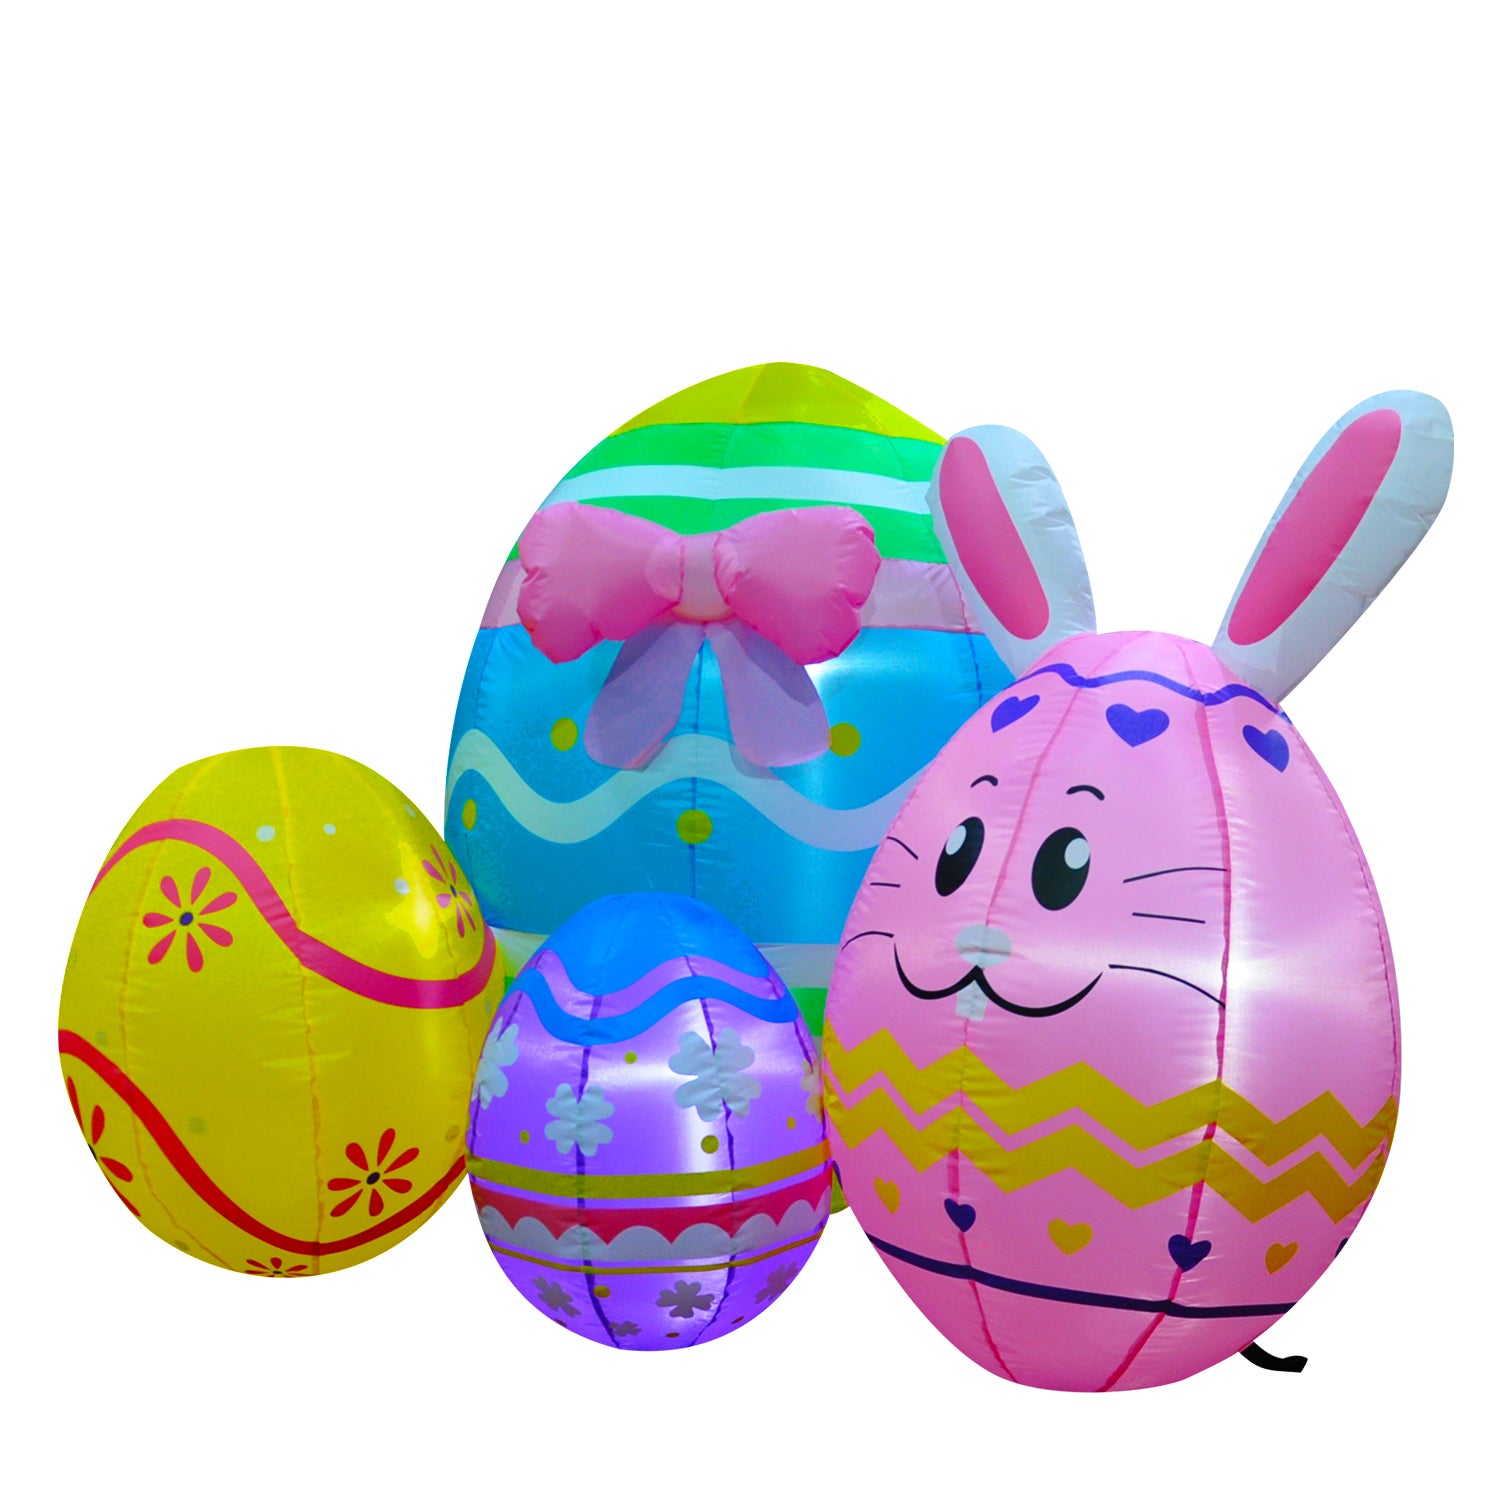 5 Ft SEASONBLOW Inflatable Easter Bunny Eggs Decorations.